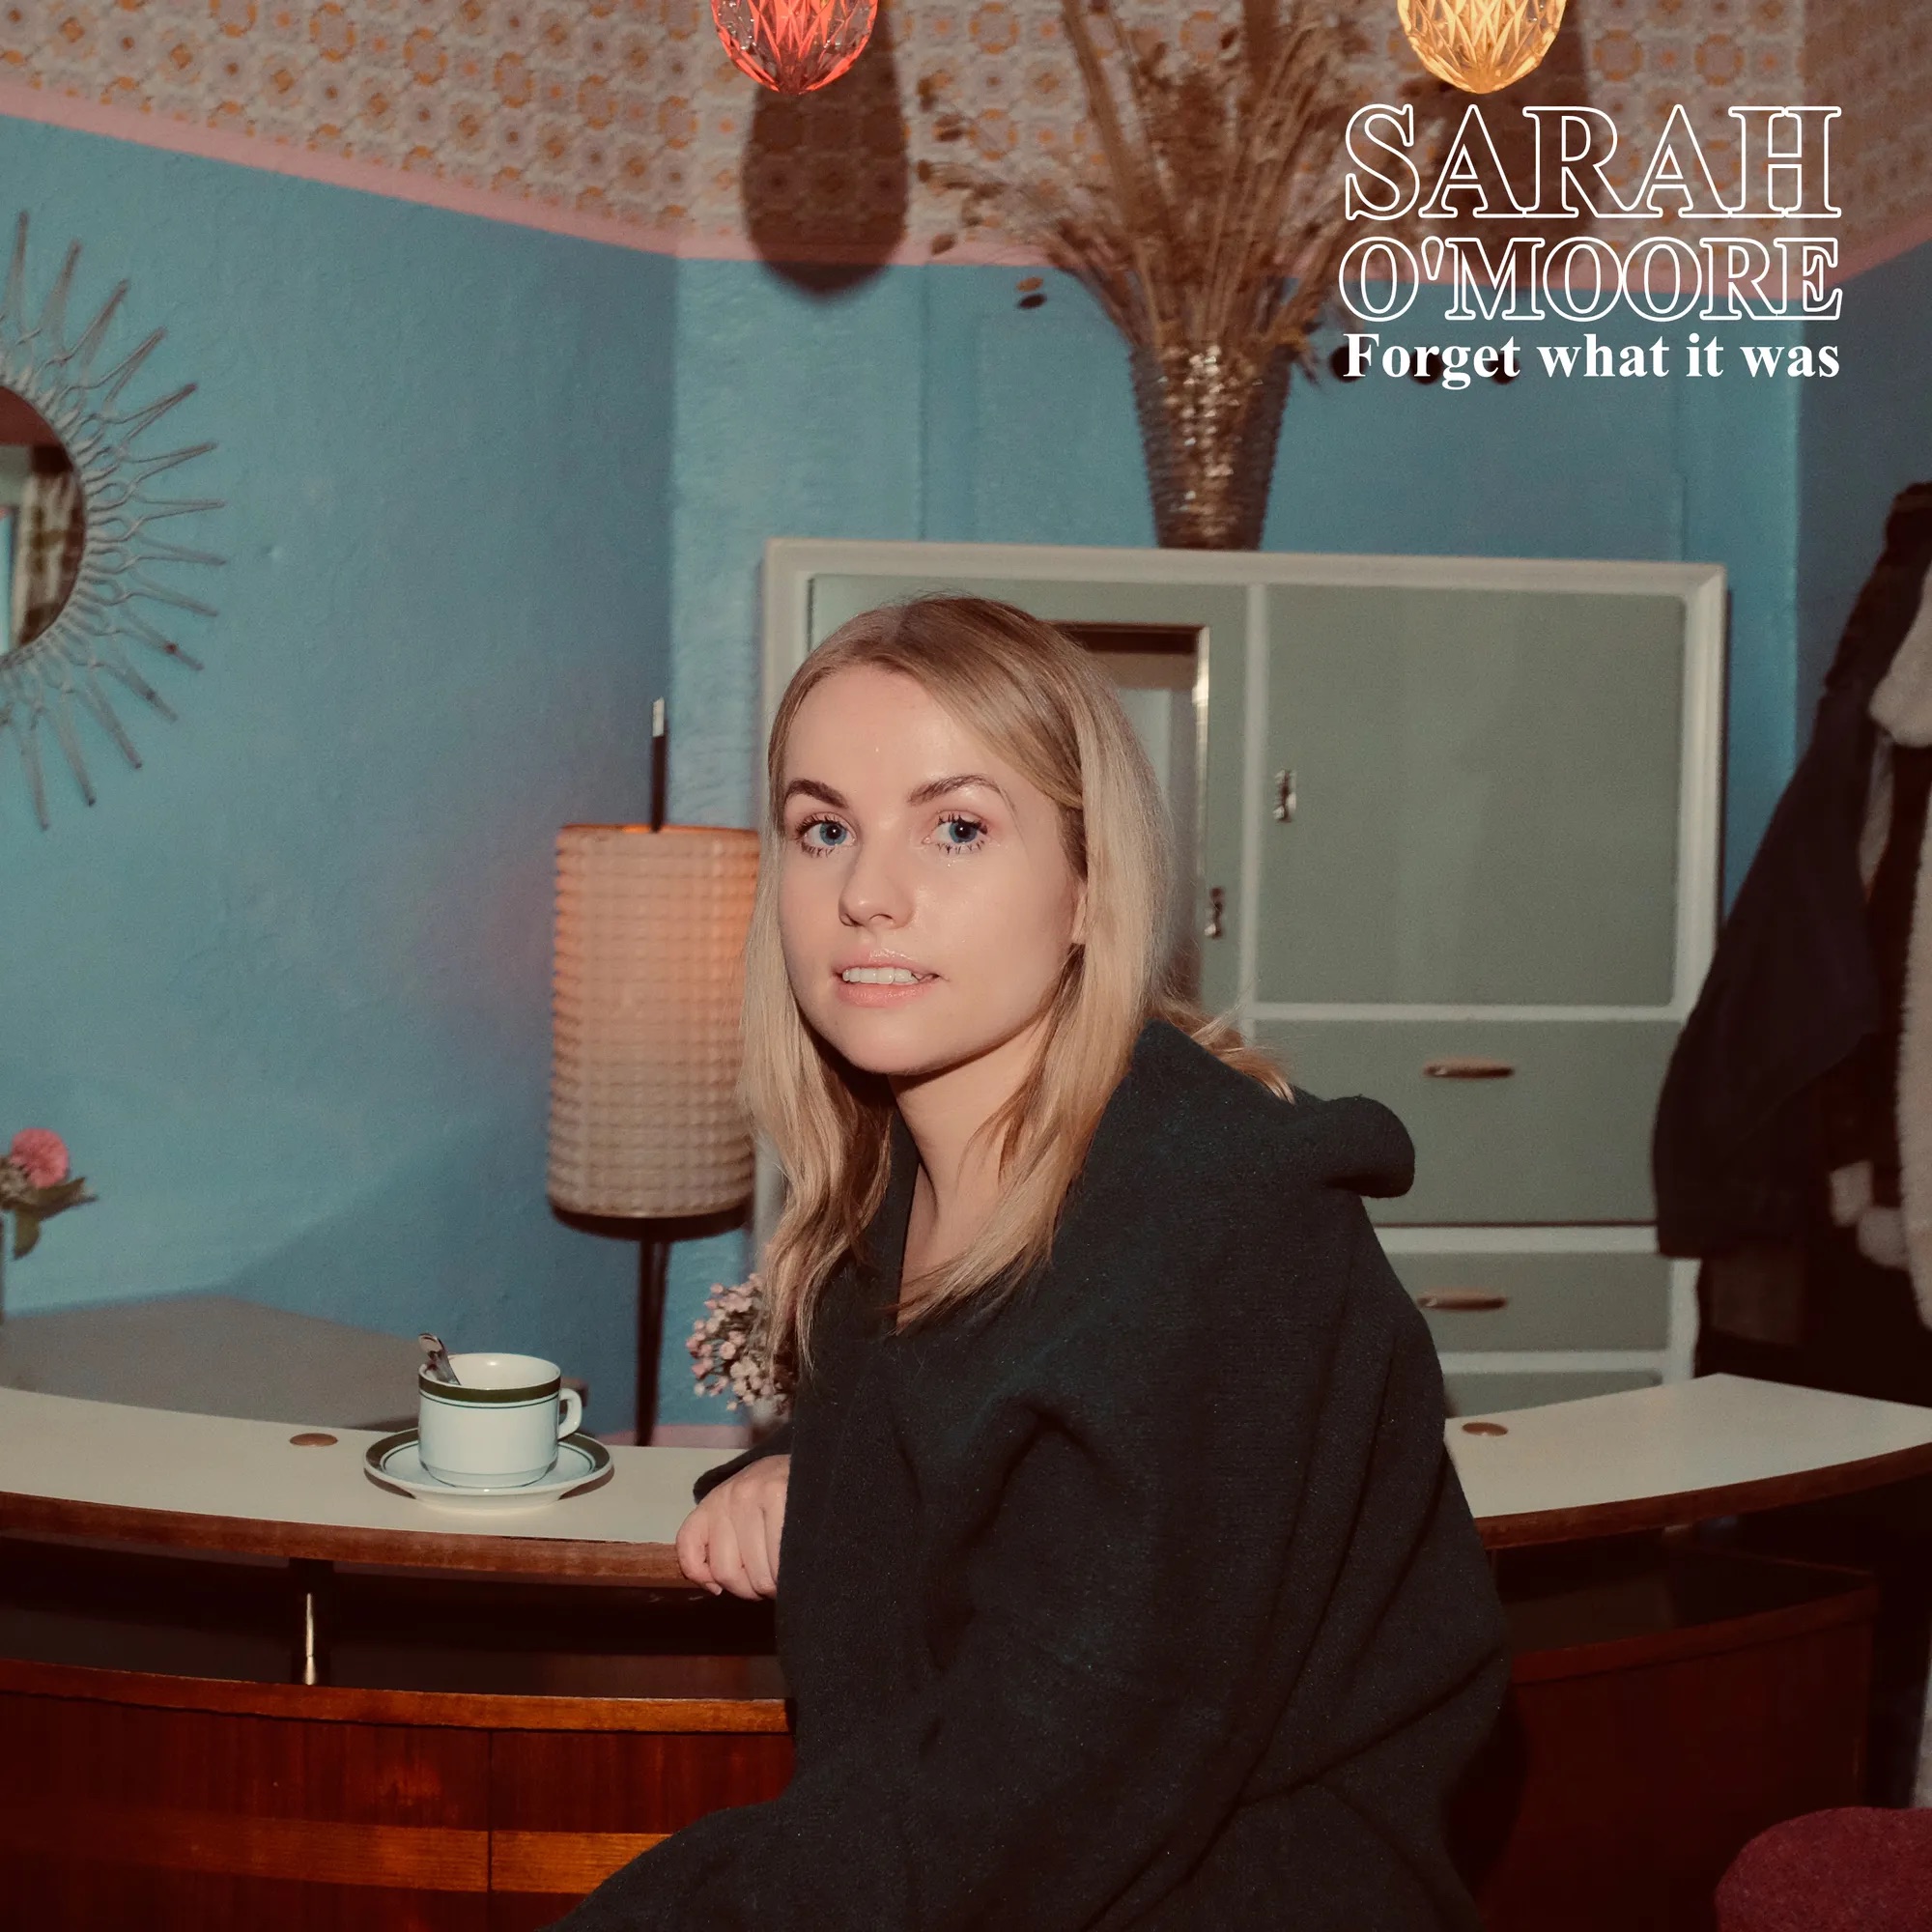 LISTEN: “Forget What It Was” by Sarah O’Moore